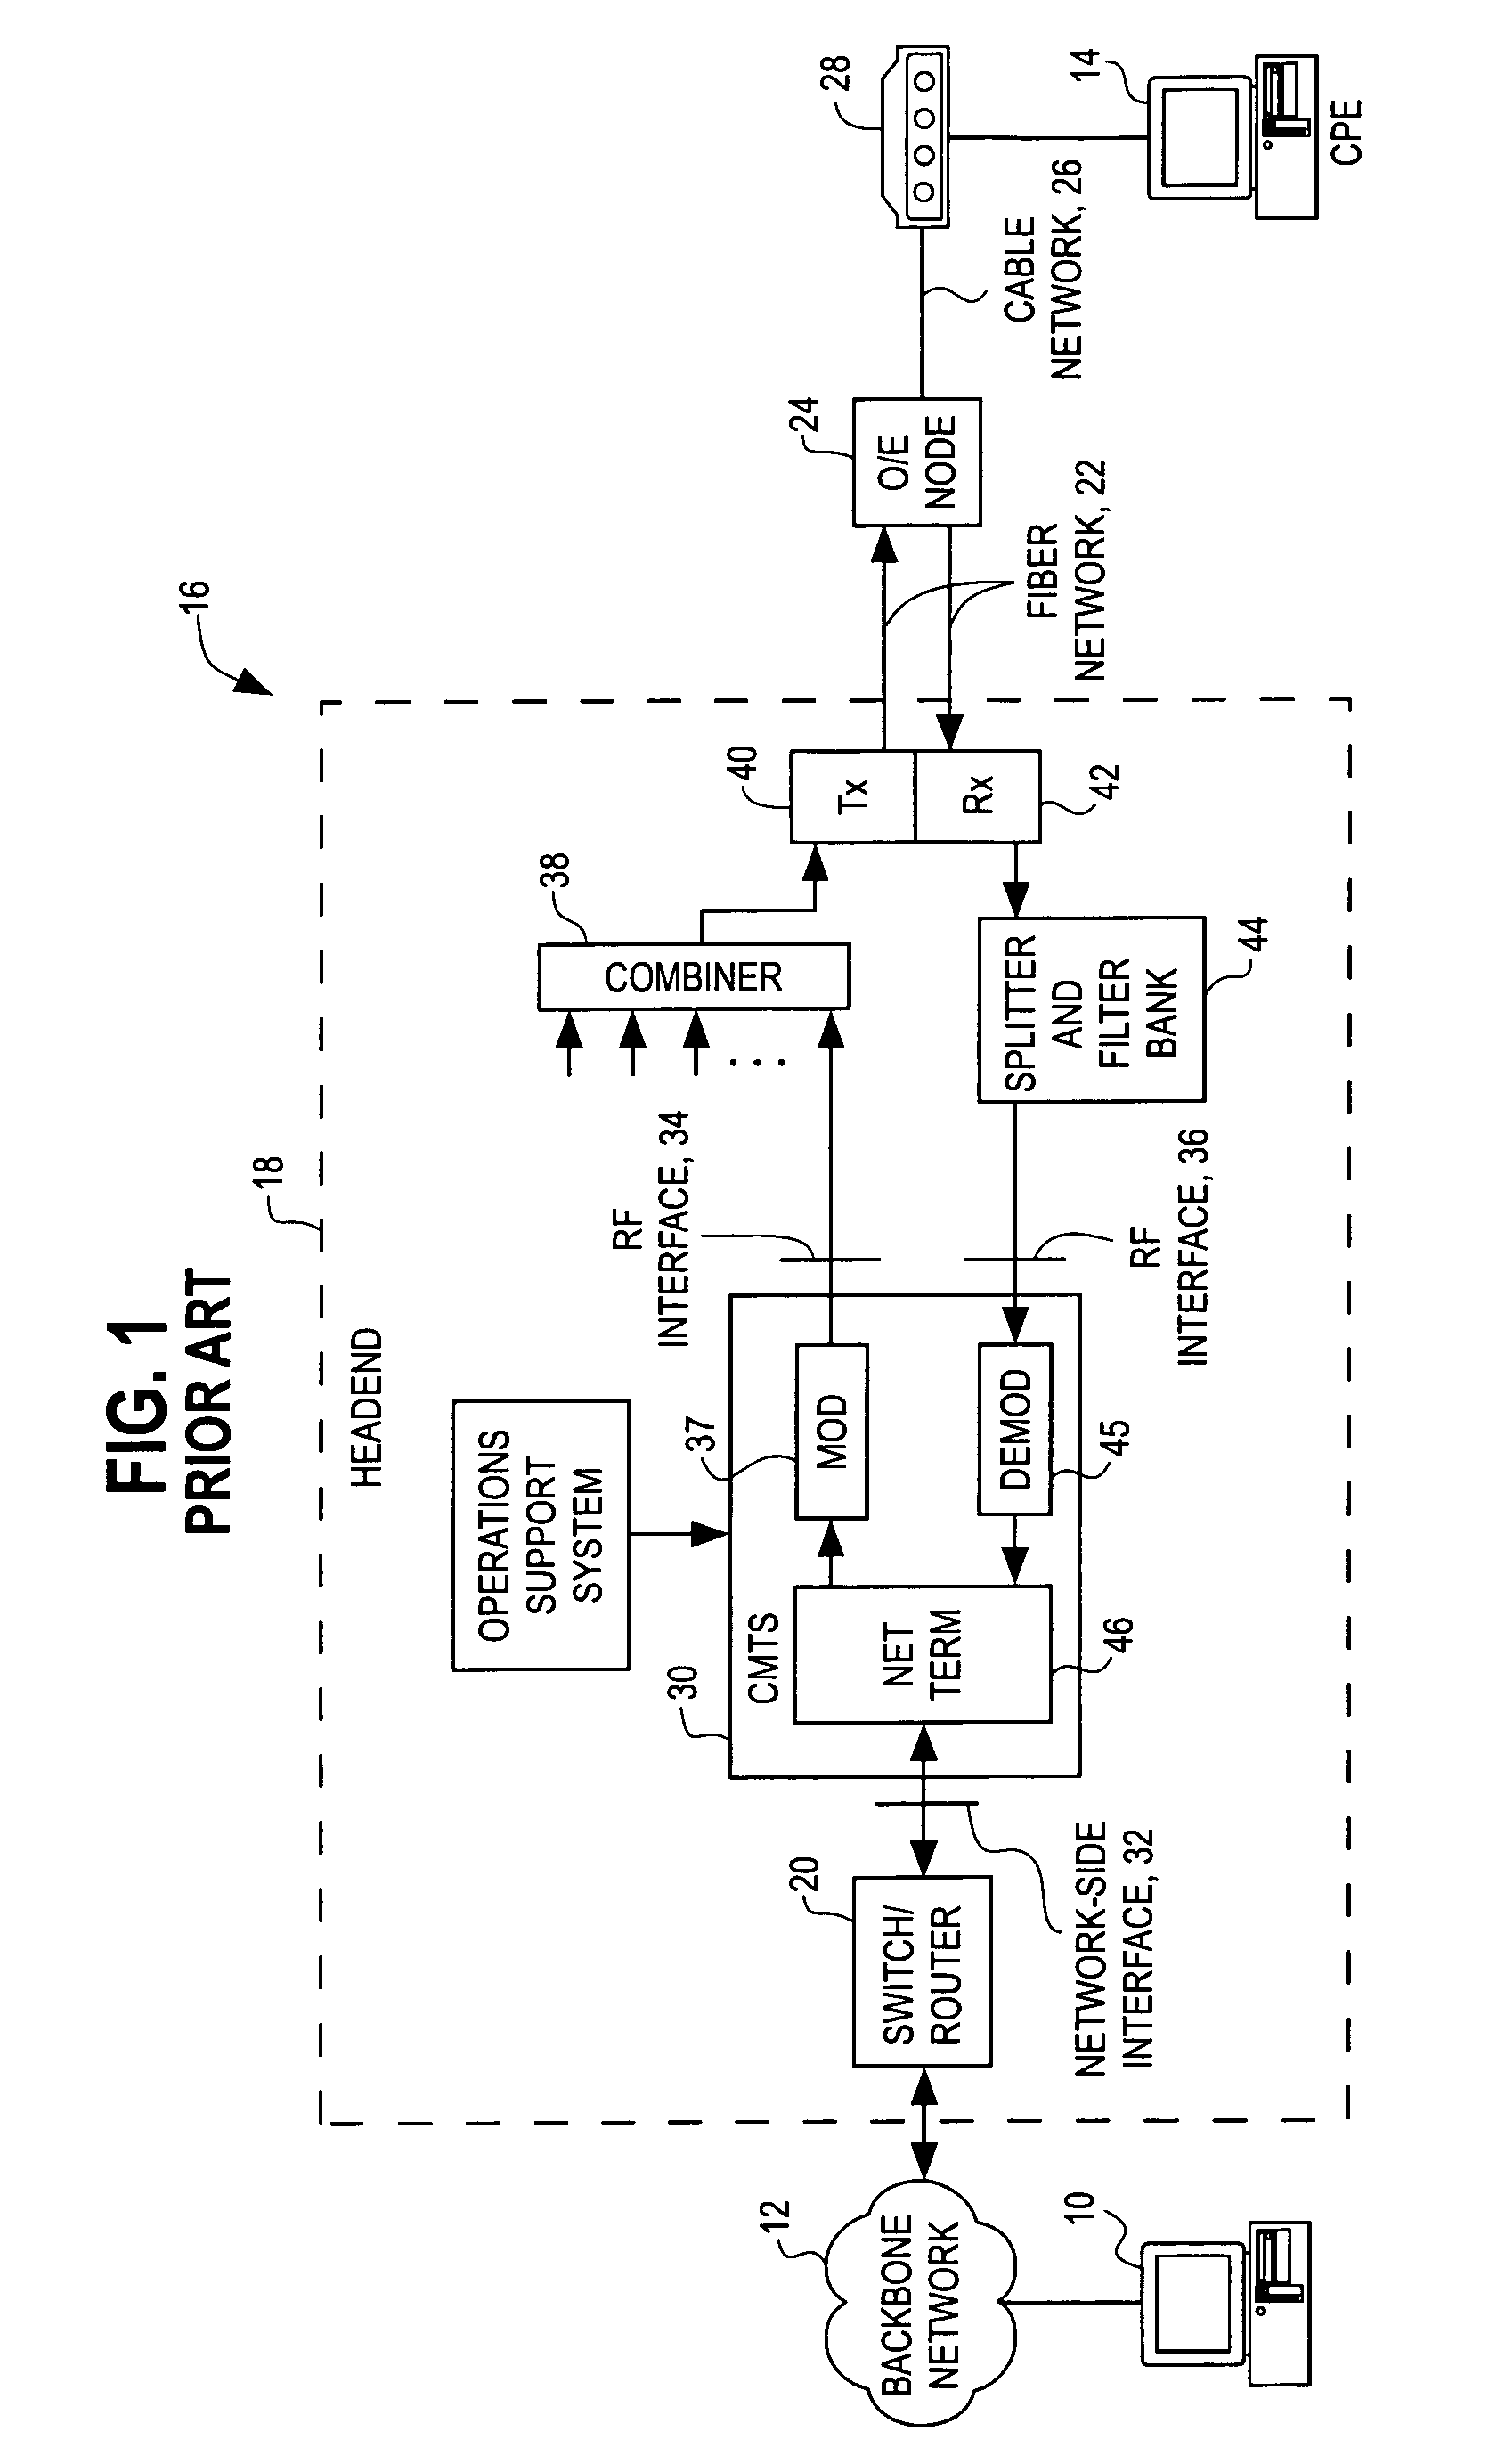 Upstream transmission profiles for a DOCSIS or DOCSIS-like system